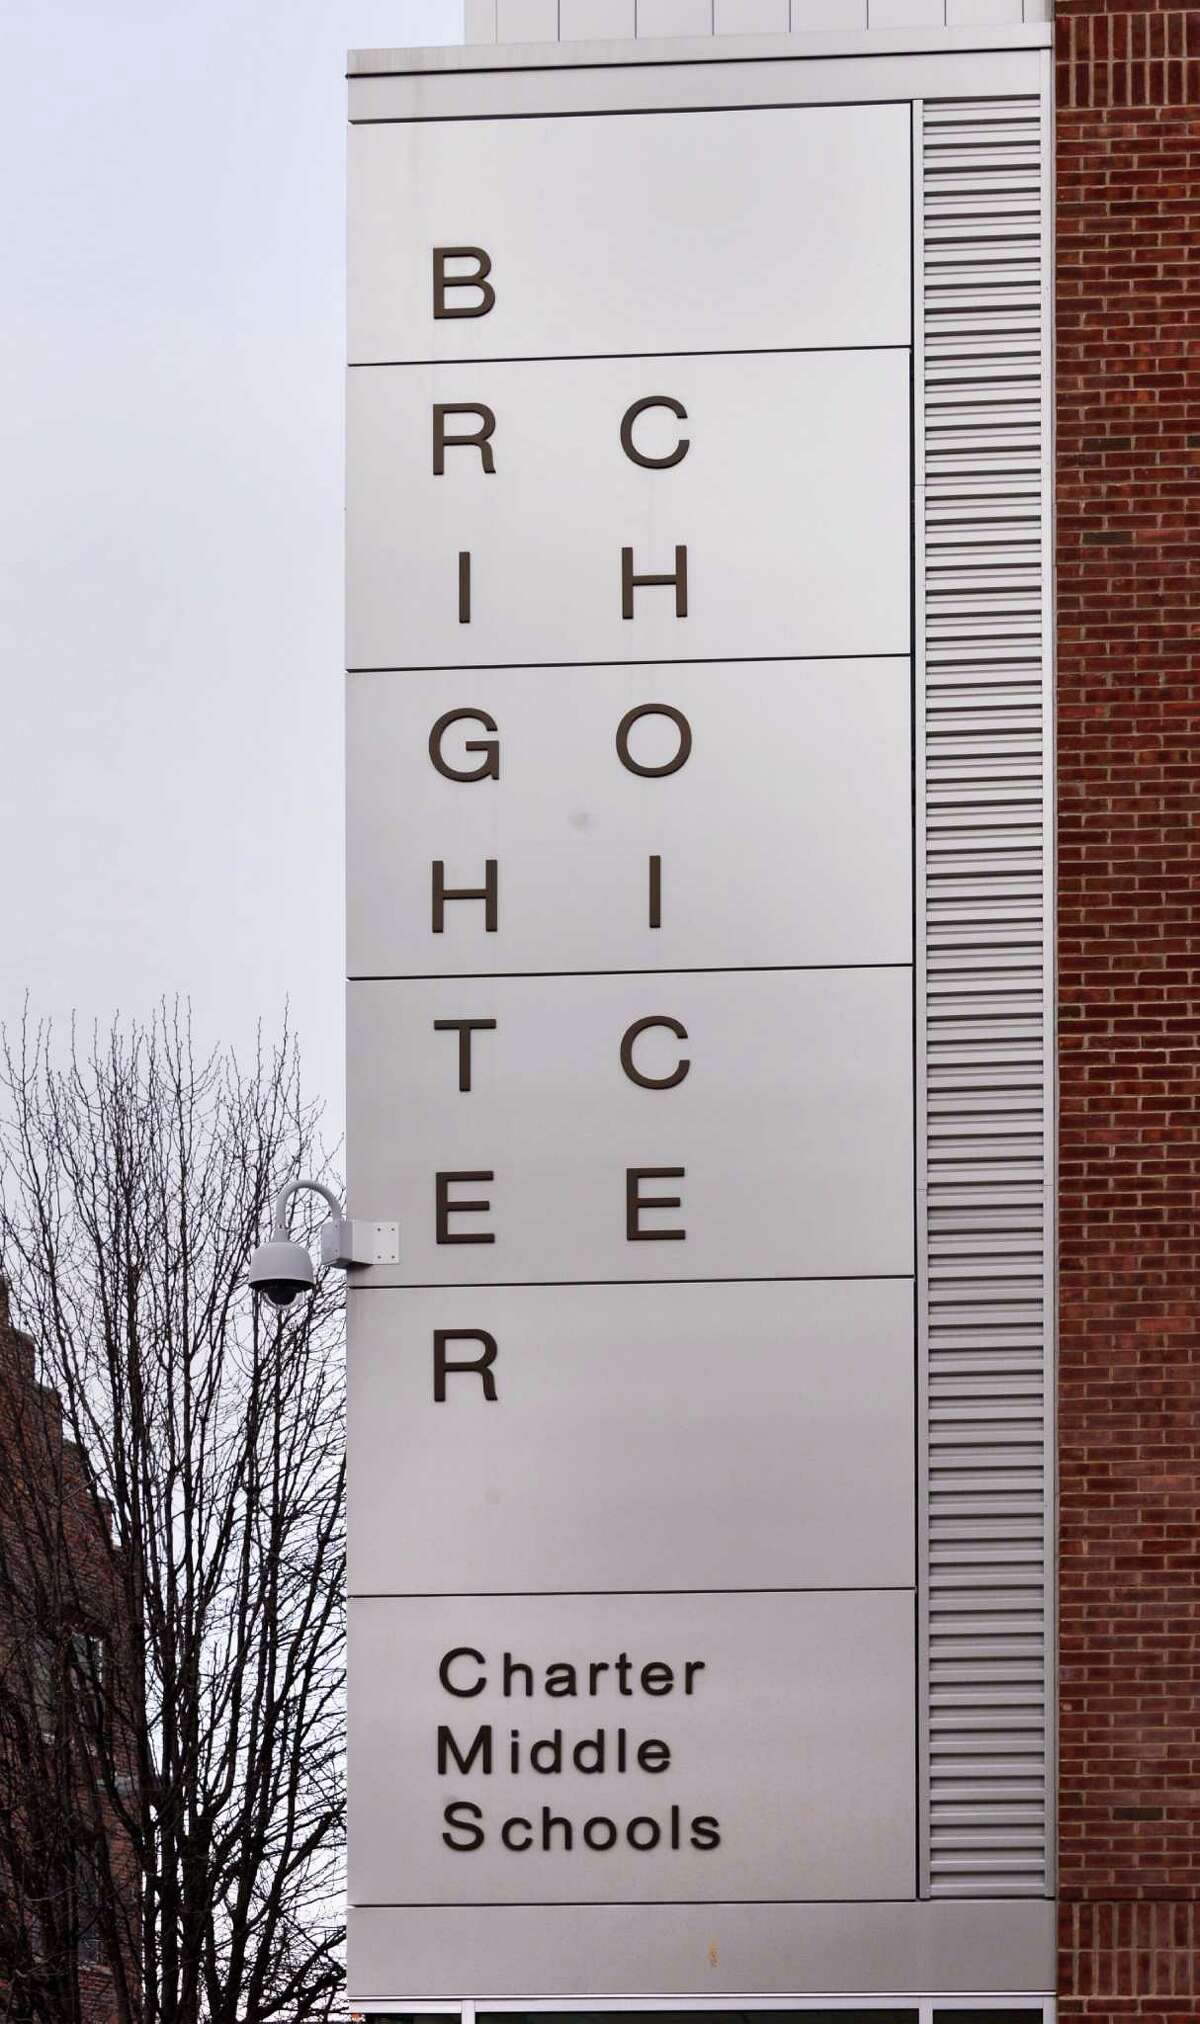 Sign on the Brighter Choice Charter Middle Schools in Albany Friday Jan. 25, 2013. (John Carl D'Annibale / Times Union)